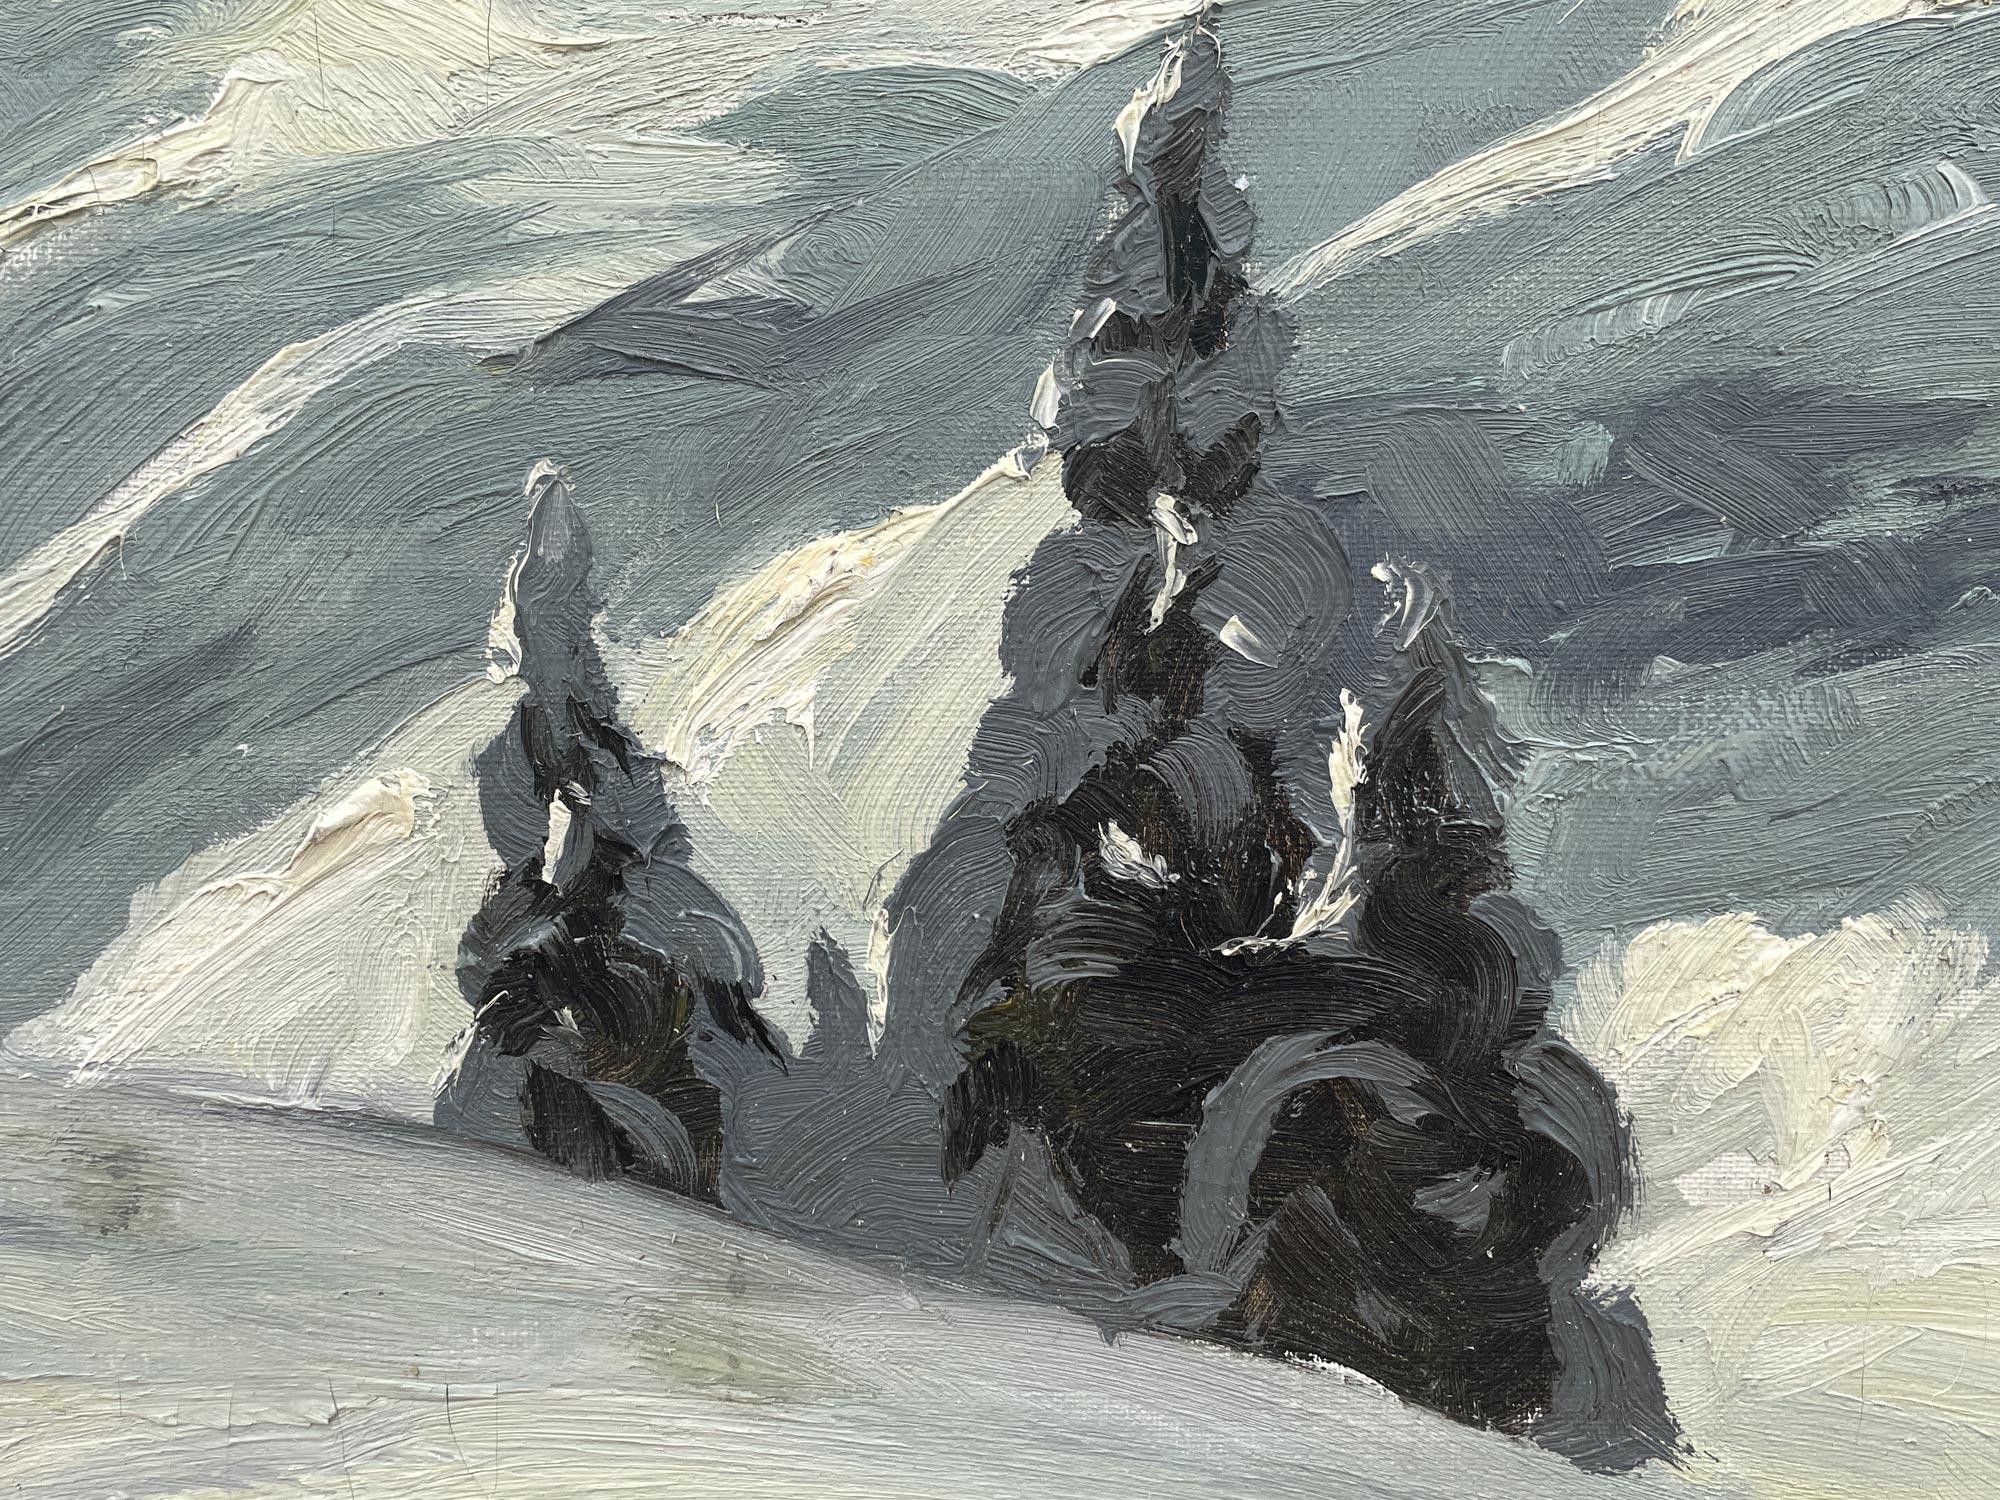 Snow on the Peaks - Georg Grauvogl (1896 - 1986)

70 x 80 cm without frame
74 x 84 cm with antique fir frame

oil painting on canvas
1930s

A few, vibrant brushstrokes of color perfectly render the snow-laden fir trees. The color contrasts outline,